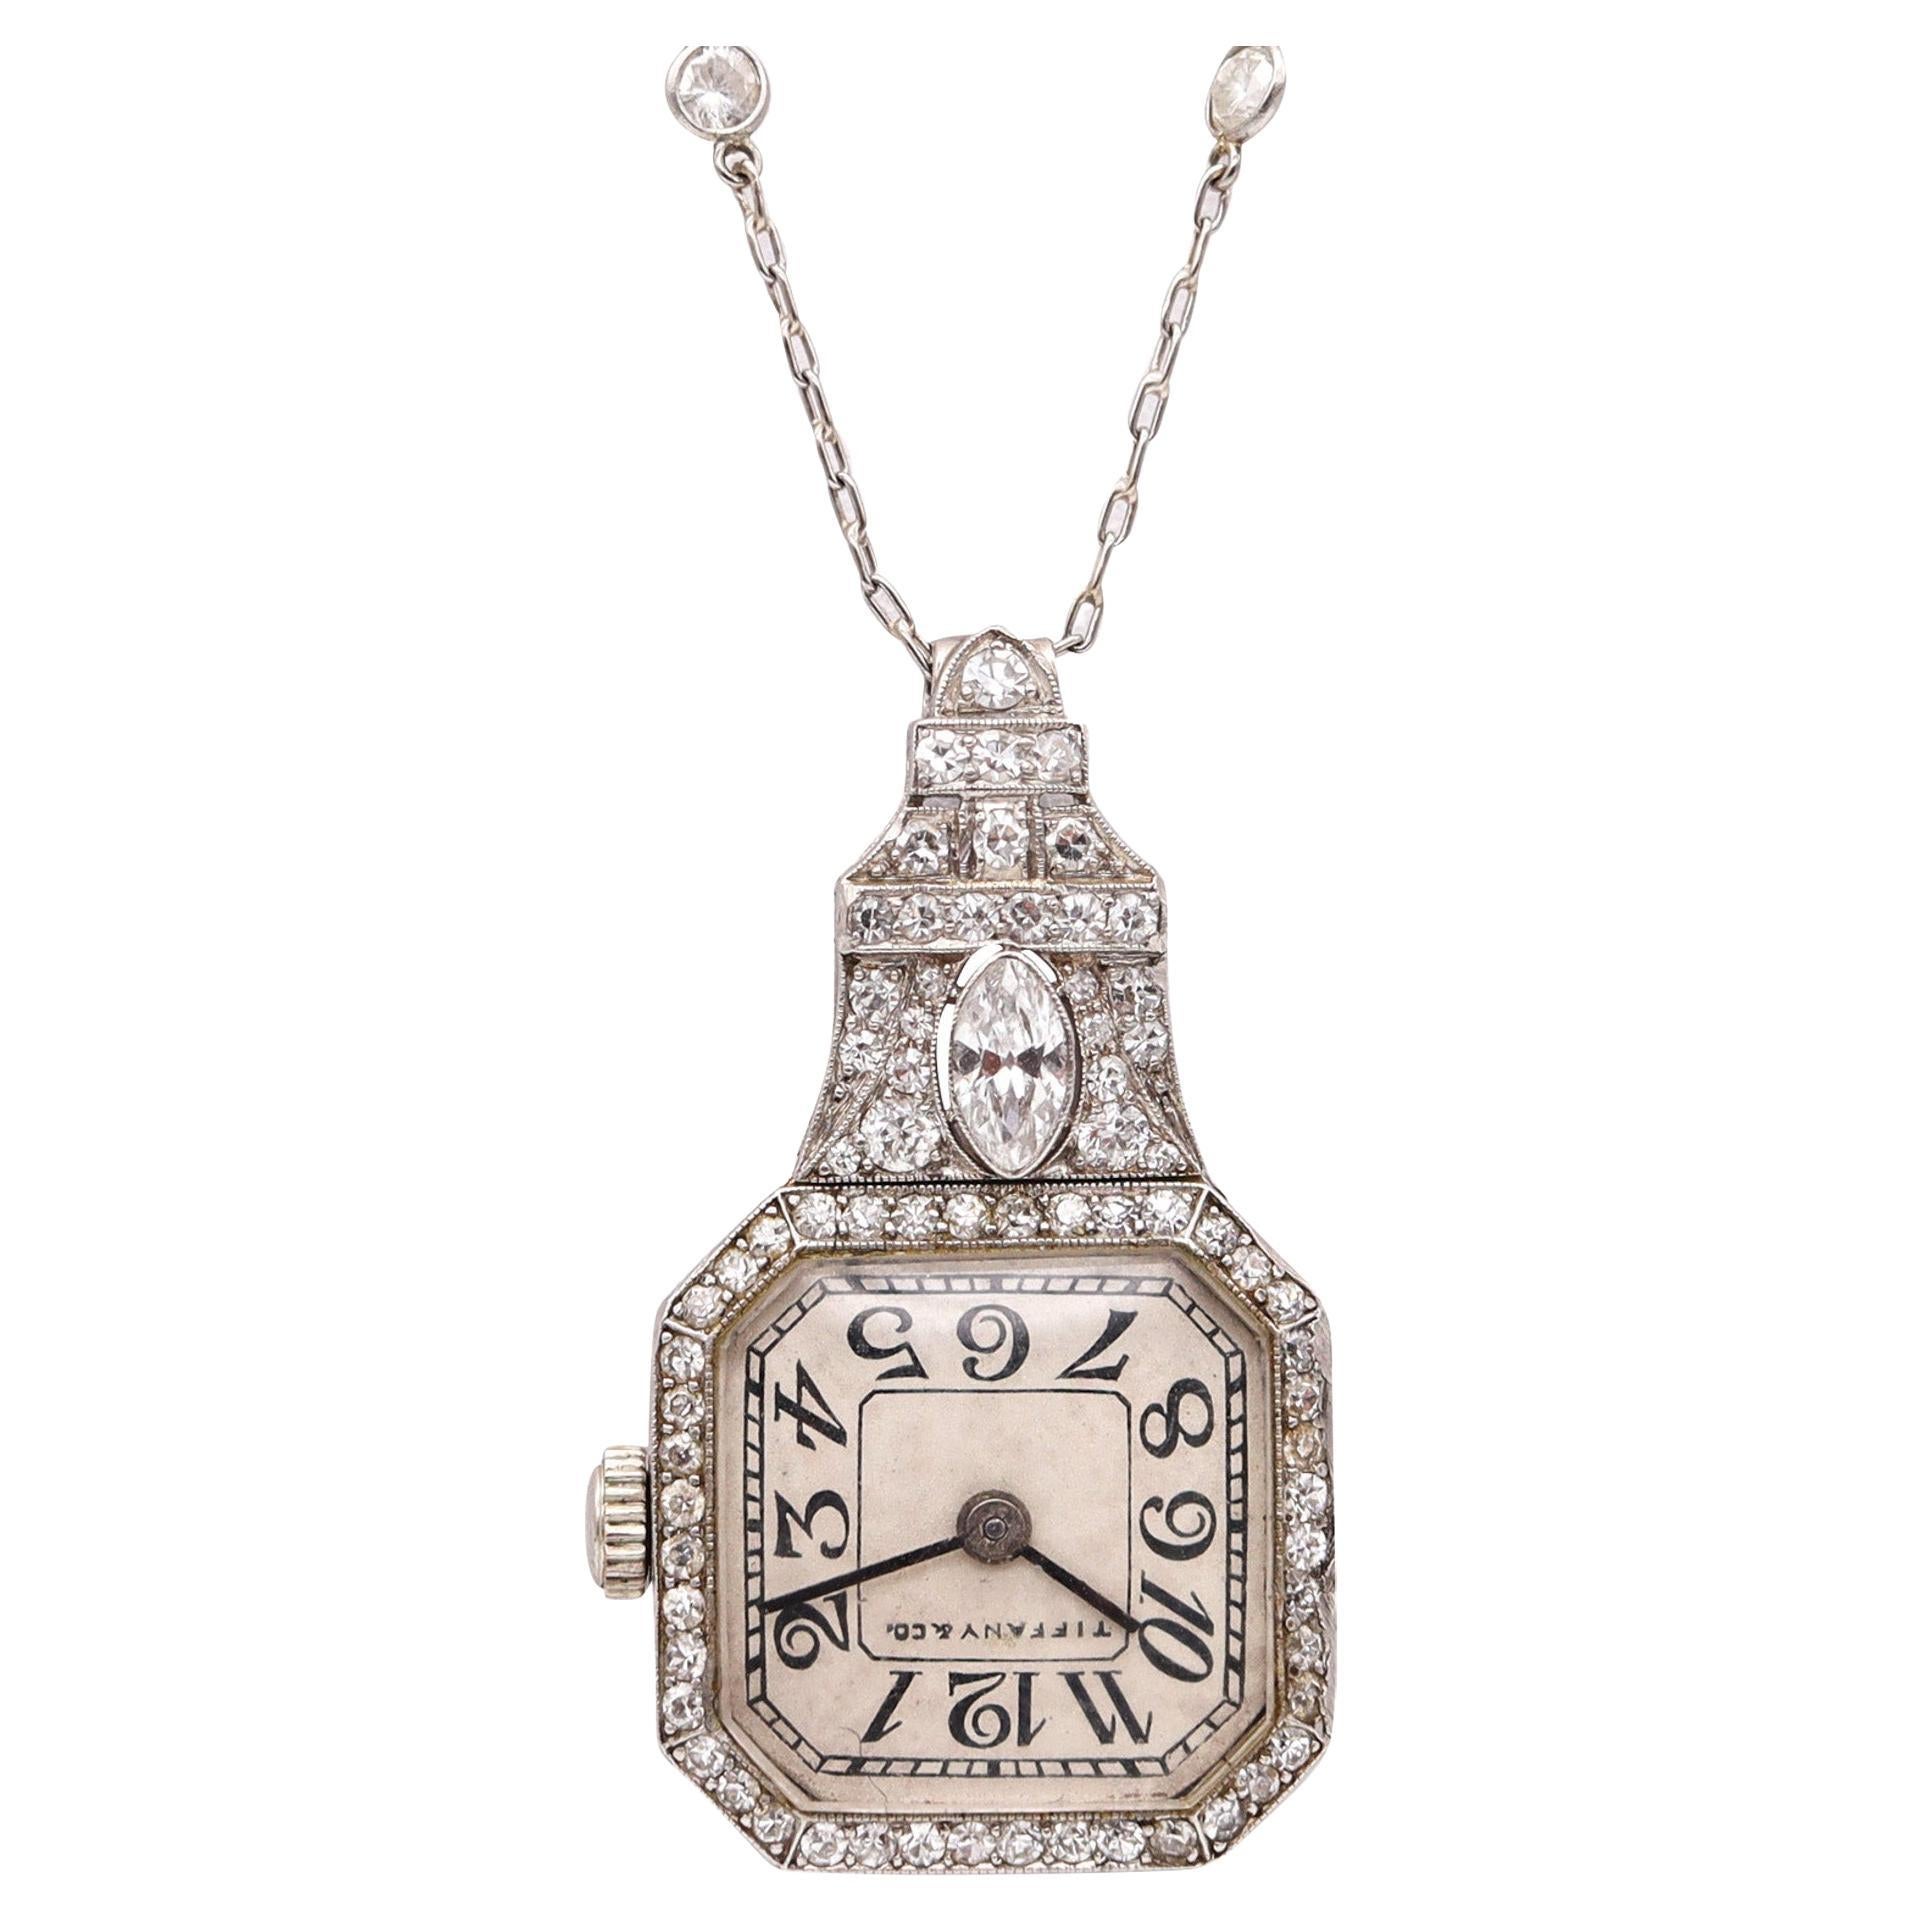 Tiffany & Co. 1918 Art Deco Watch Necklace in Platinum with 4.03ctw Diamonds